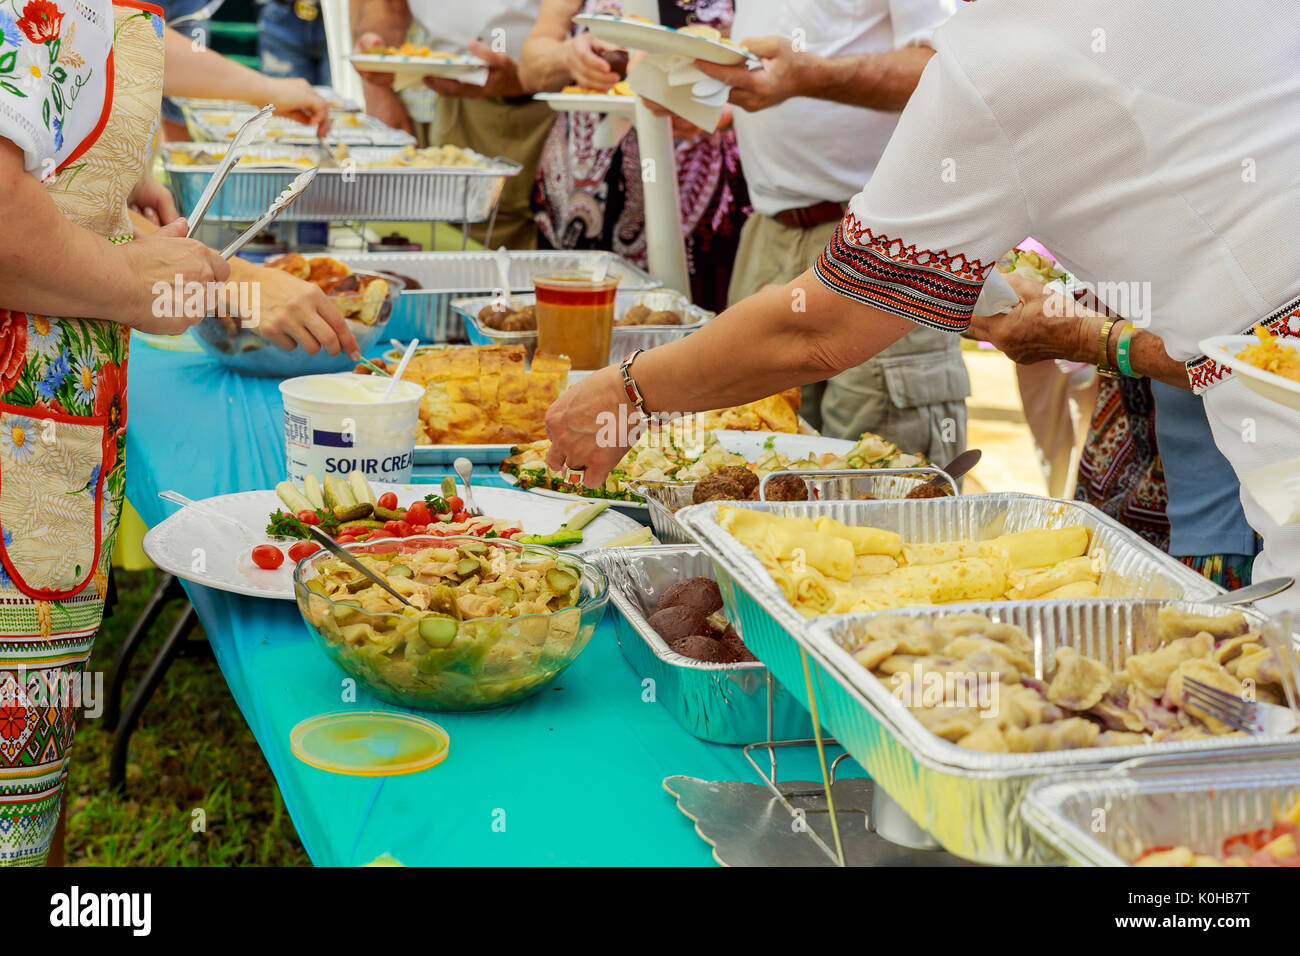 A buffet on a holiday on the street local food culinary sold at street market Stock Photo